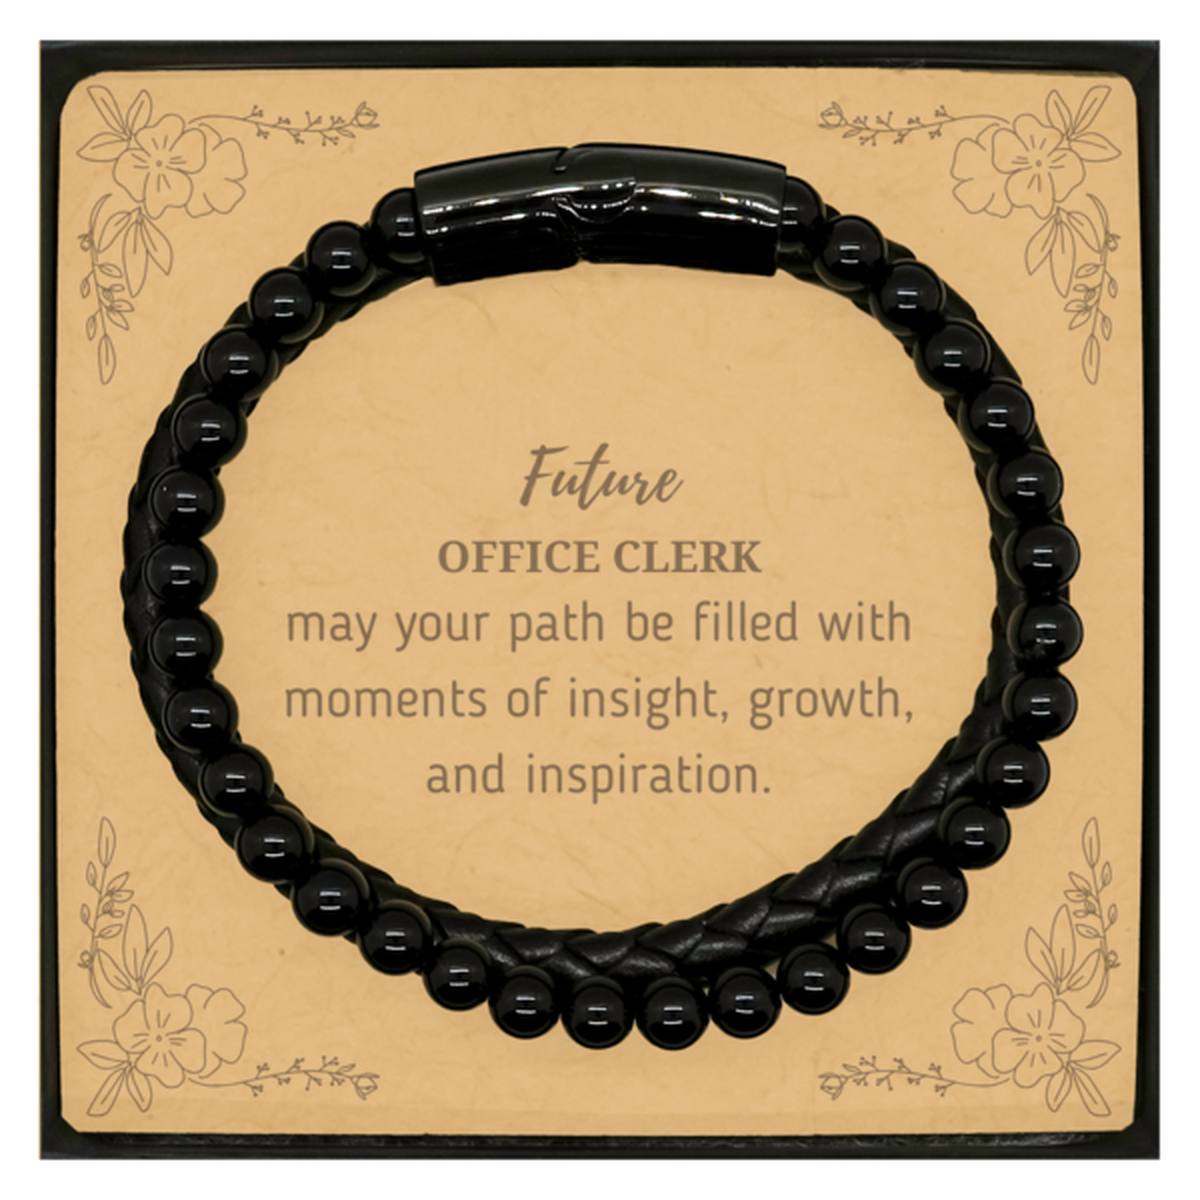 Future Office Clerk Gifts, May your path be filled with moments of insight, Graduation Gifts for New Office Clerk, Christmas Unique Stone Leather Bracelets For Men, Women, Friends